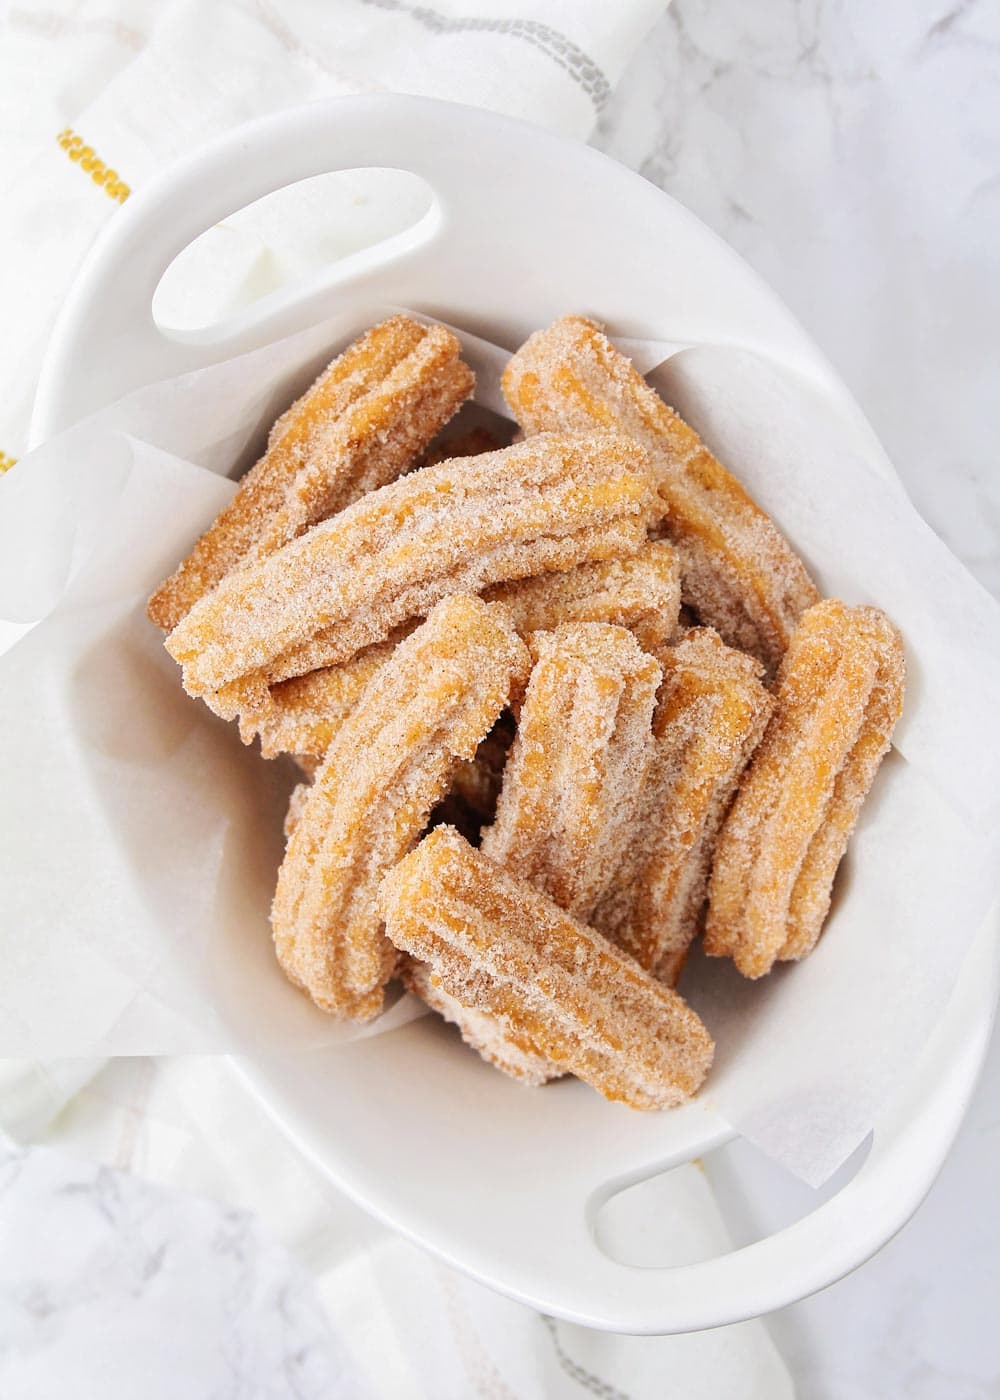 Churro recipe stacked together in white dish.